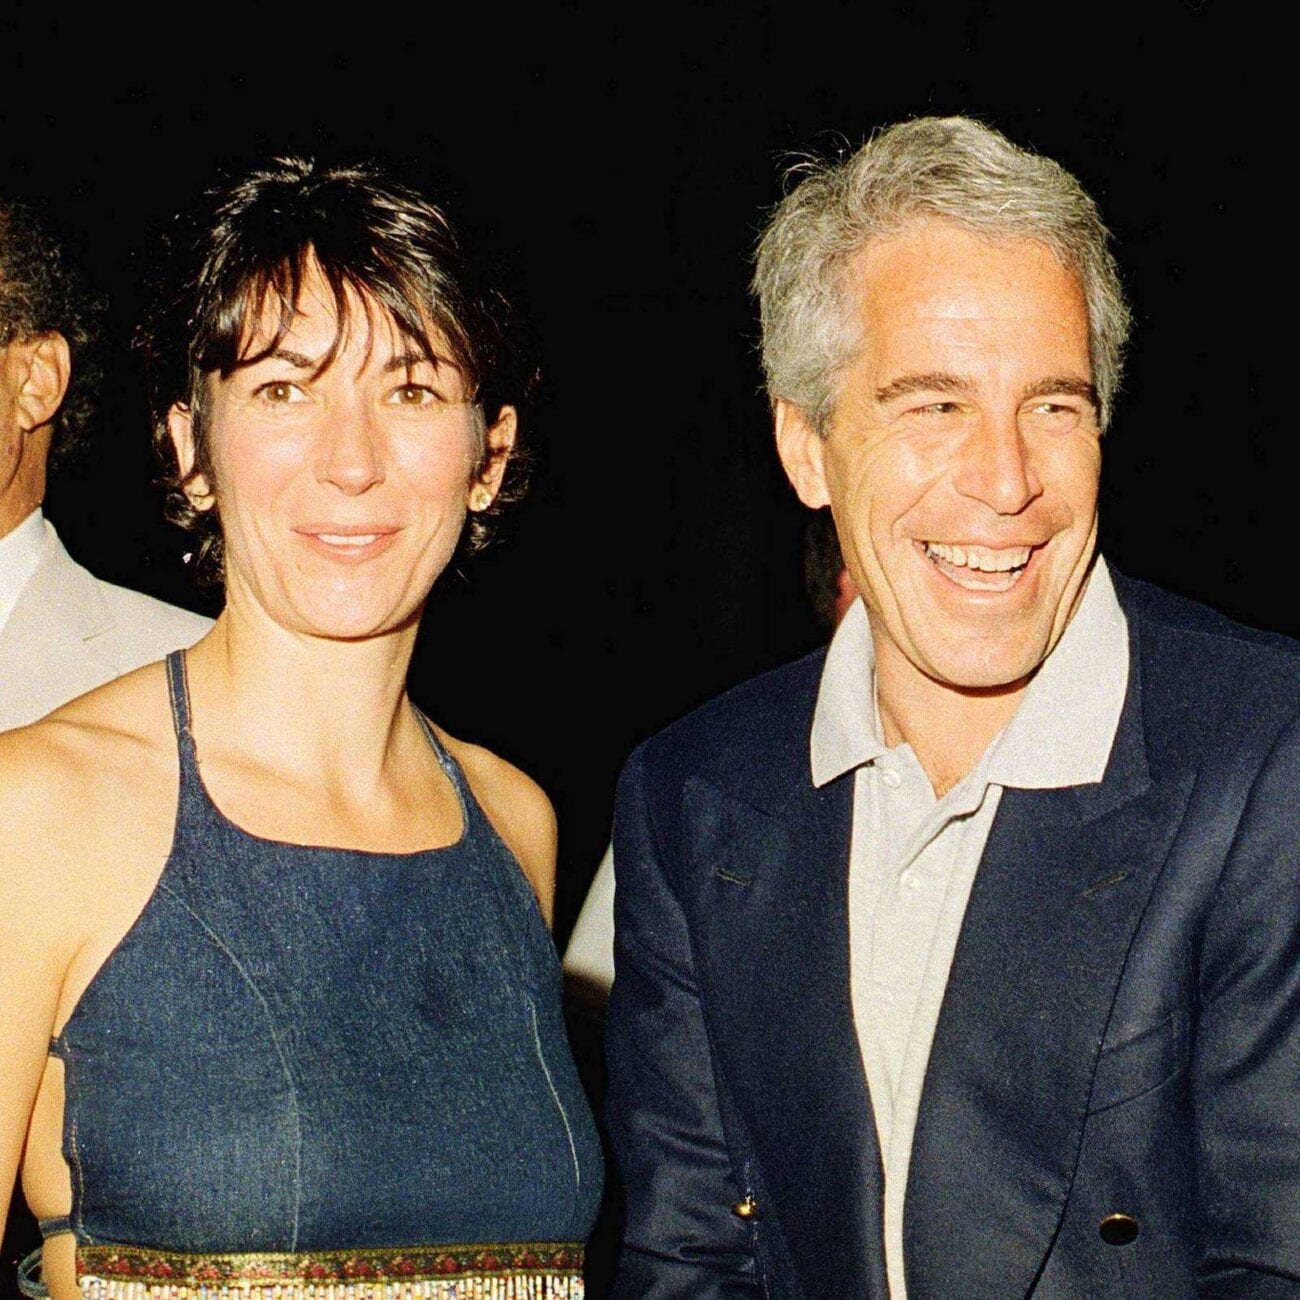 Ghislaine Maxwell recruited underage girls at the behest of Jeffrey Epstein. Meet the girls she targeted and abused.